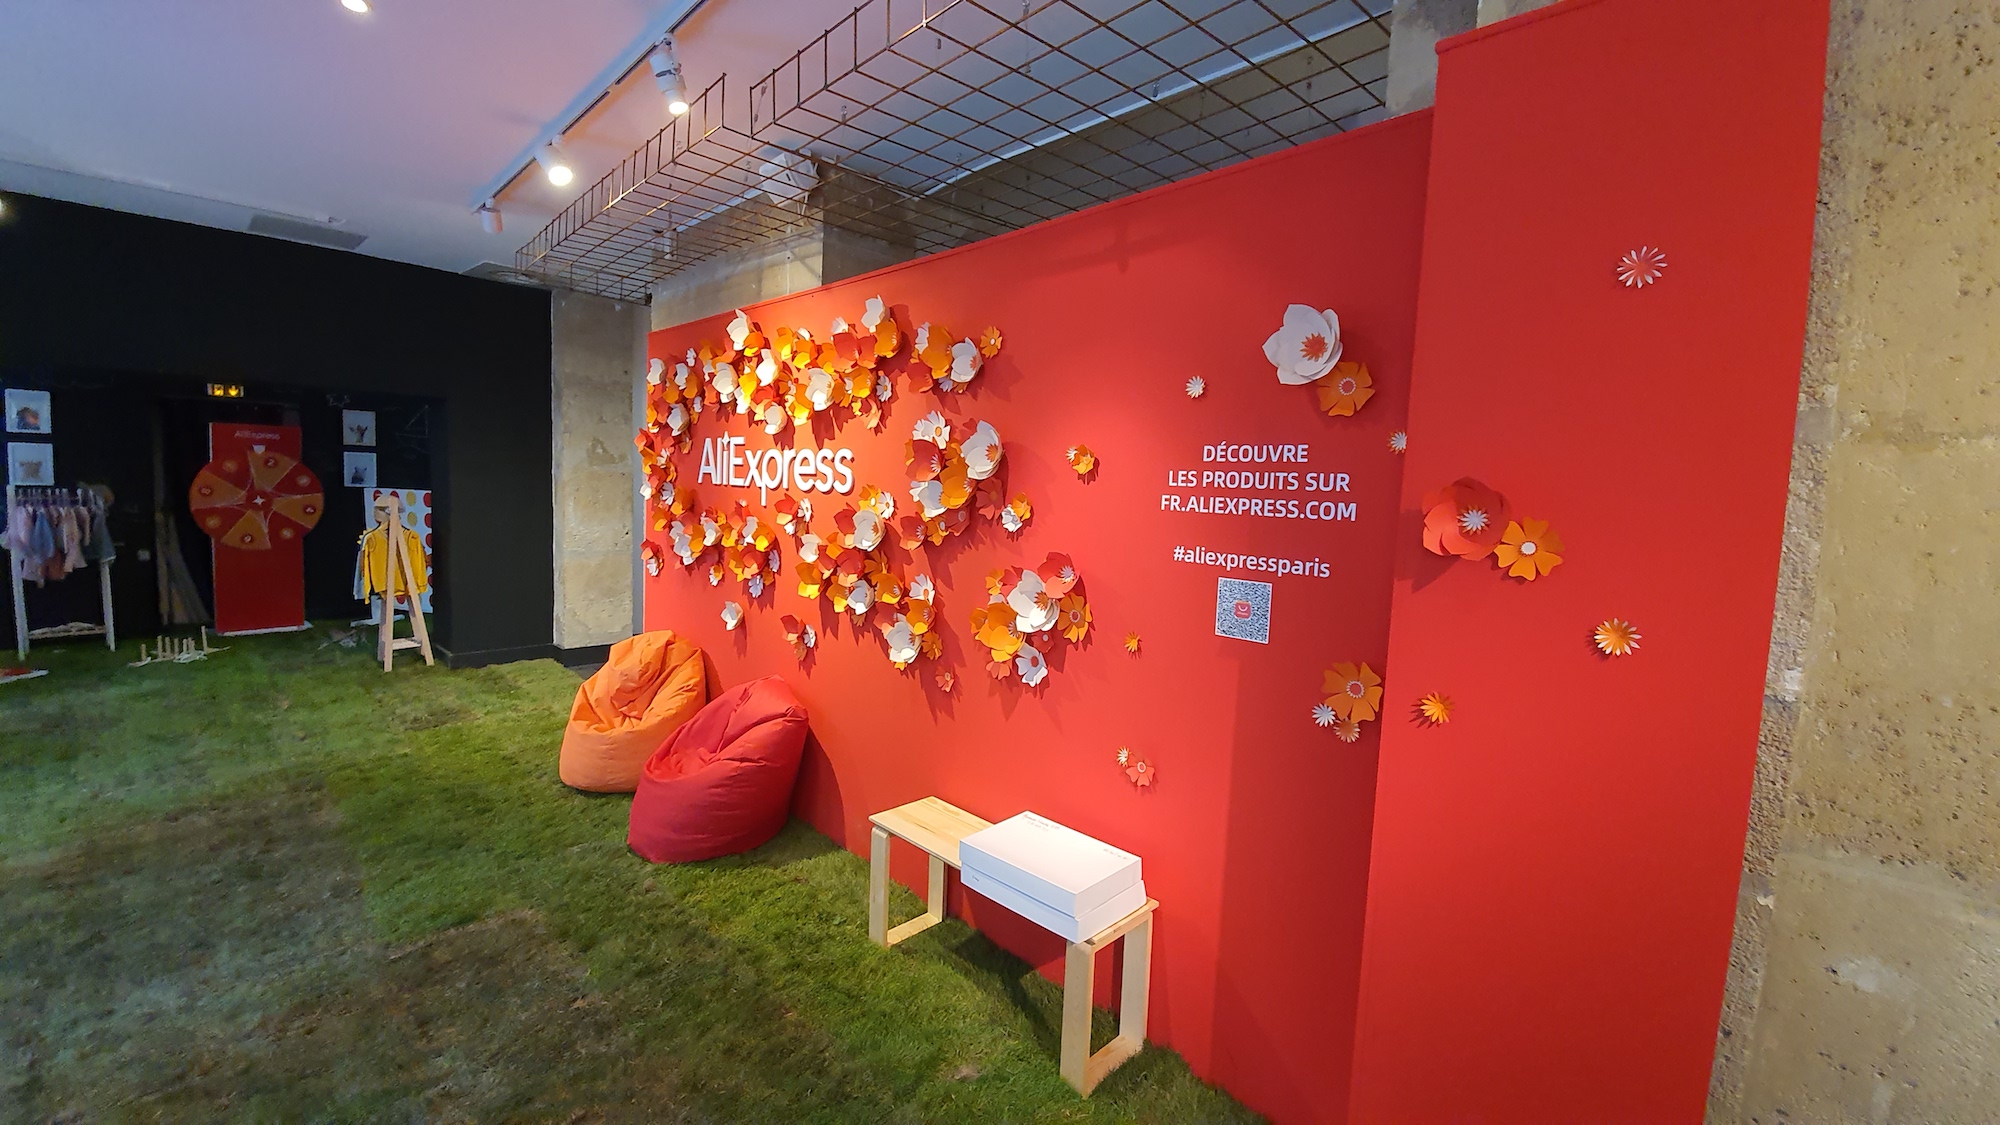 A look at the technology behind the AliExpress Pop-up Store - Altavia  Shoppermind